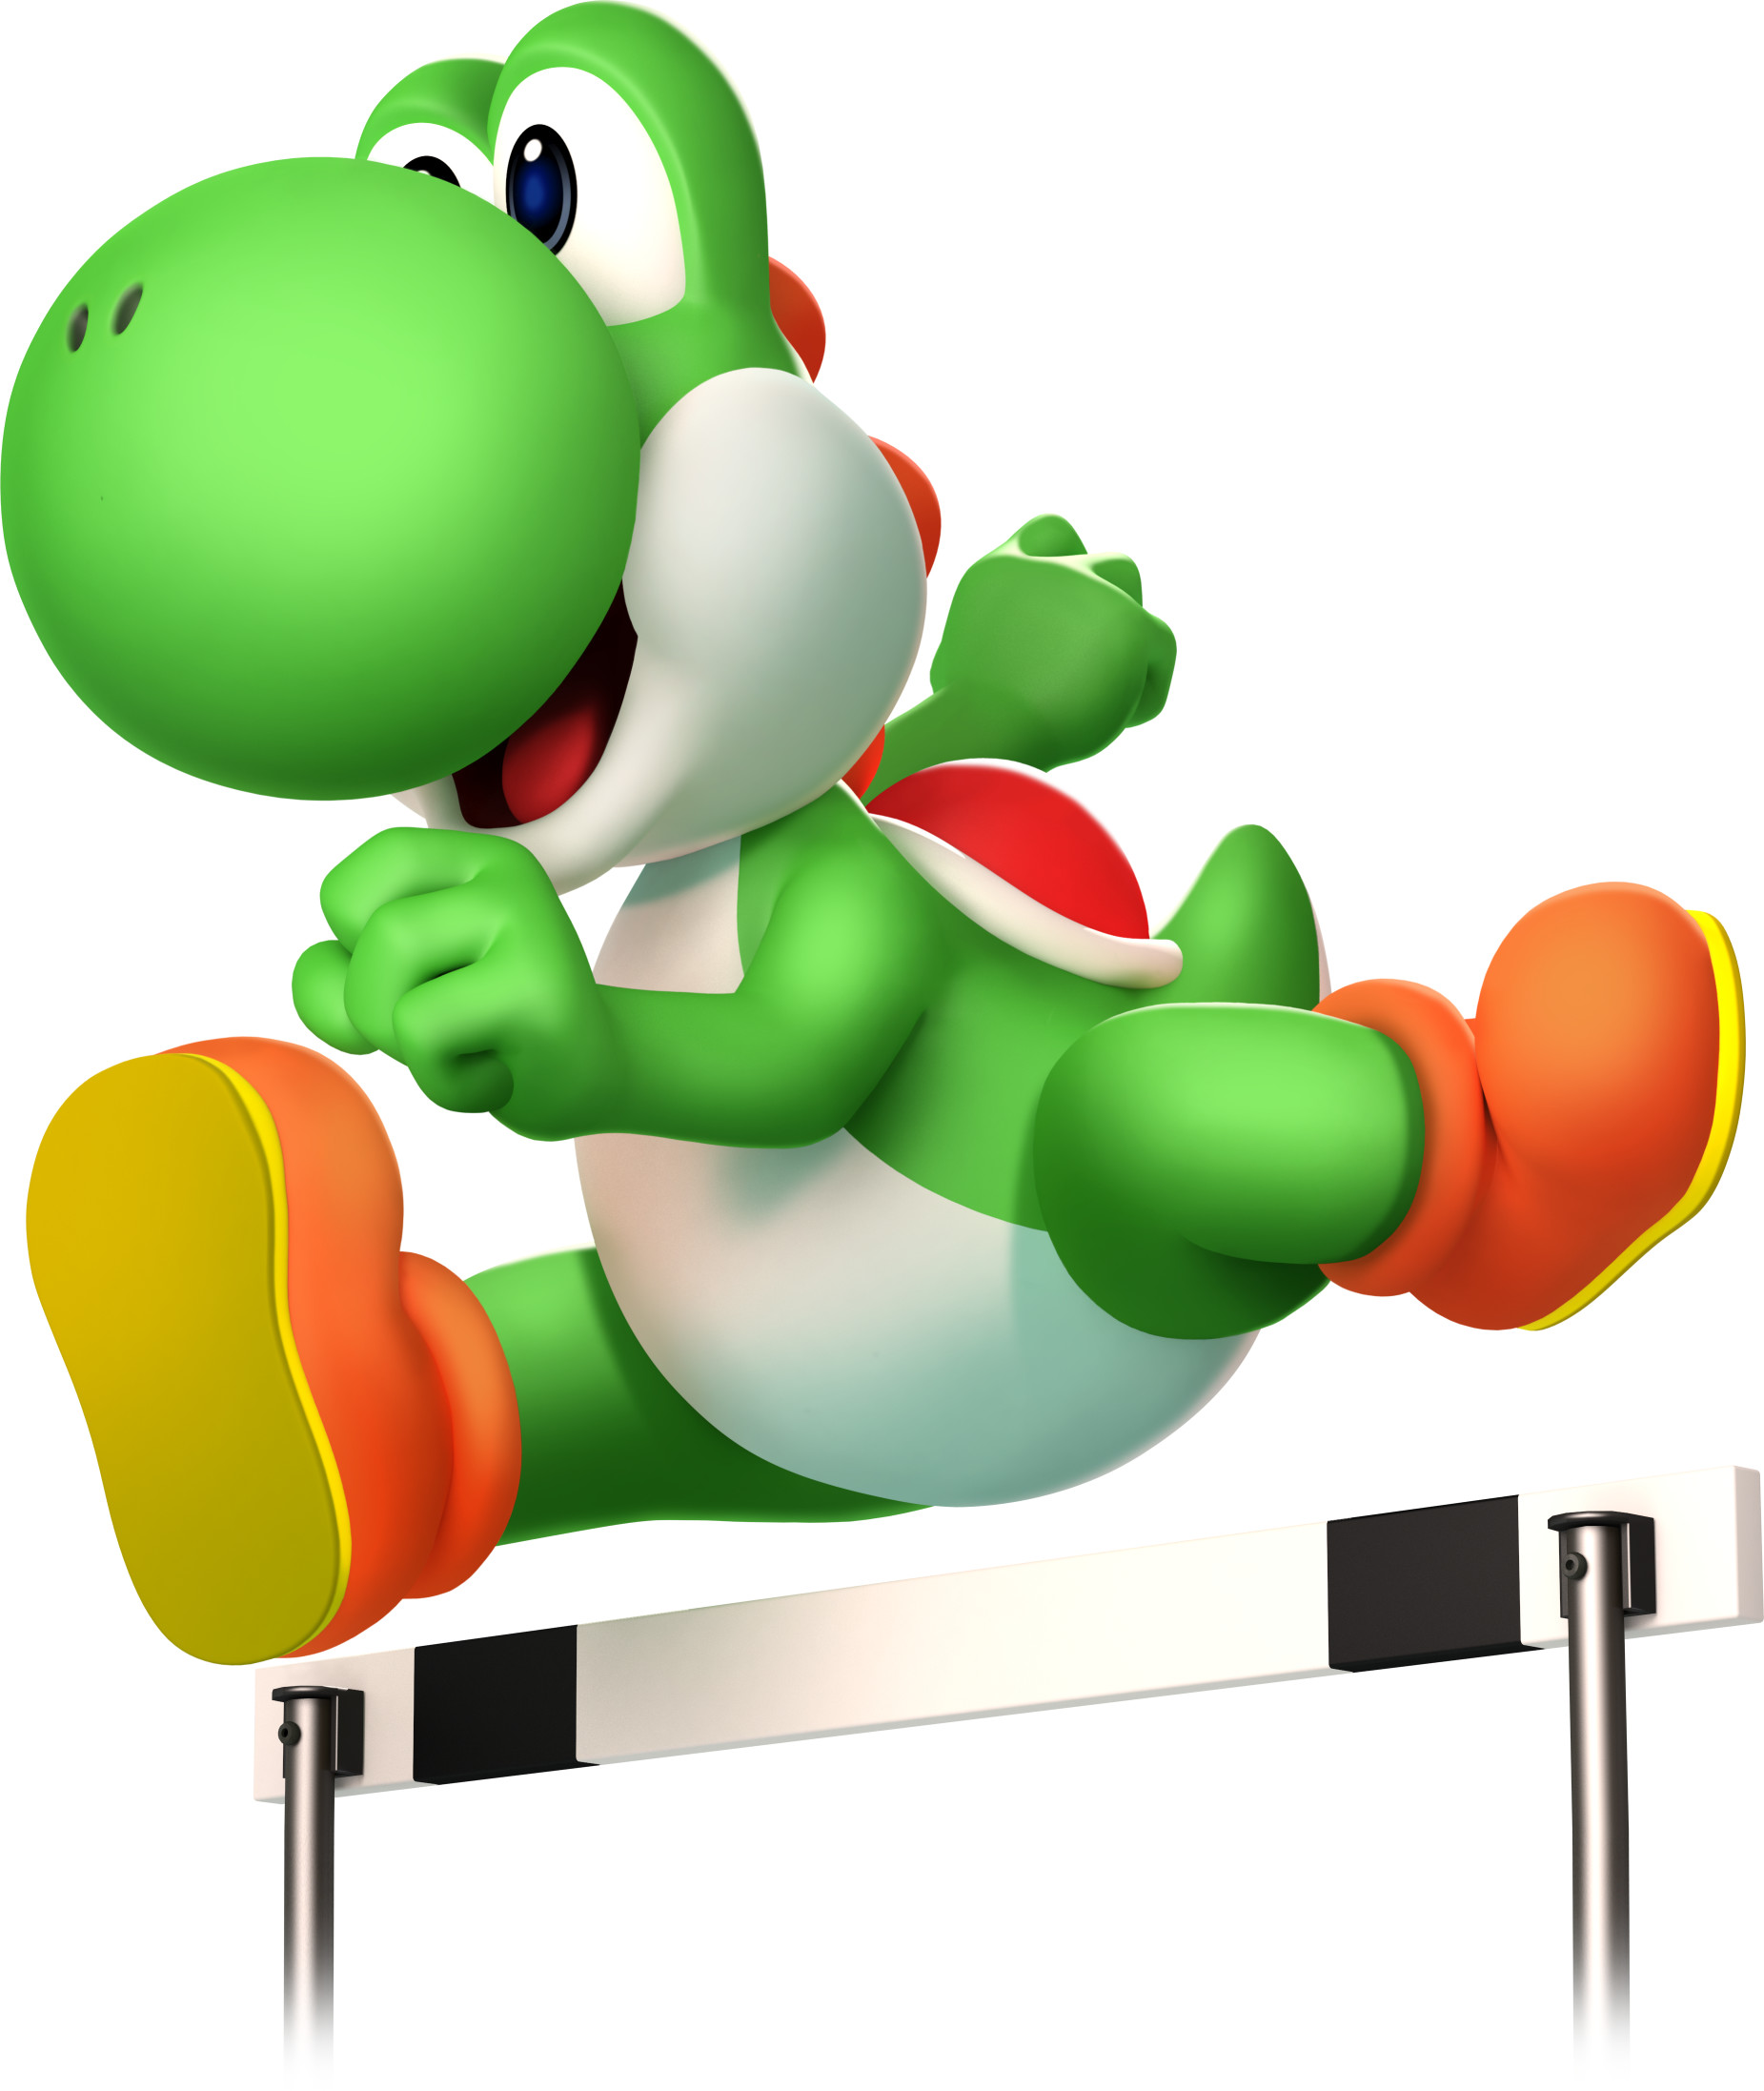 1851x2194 Yoshi PNG Image with Transparent Background